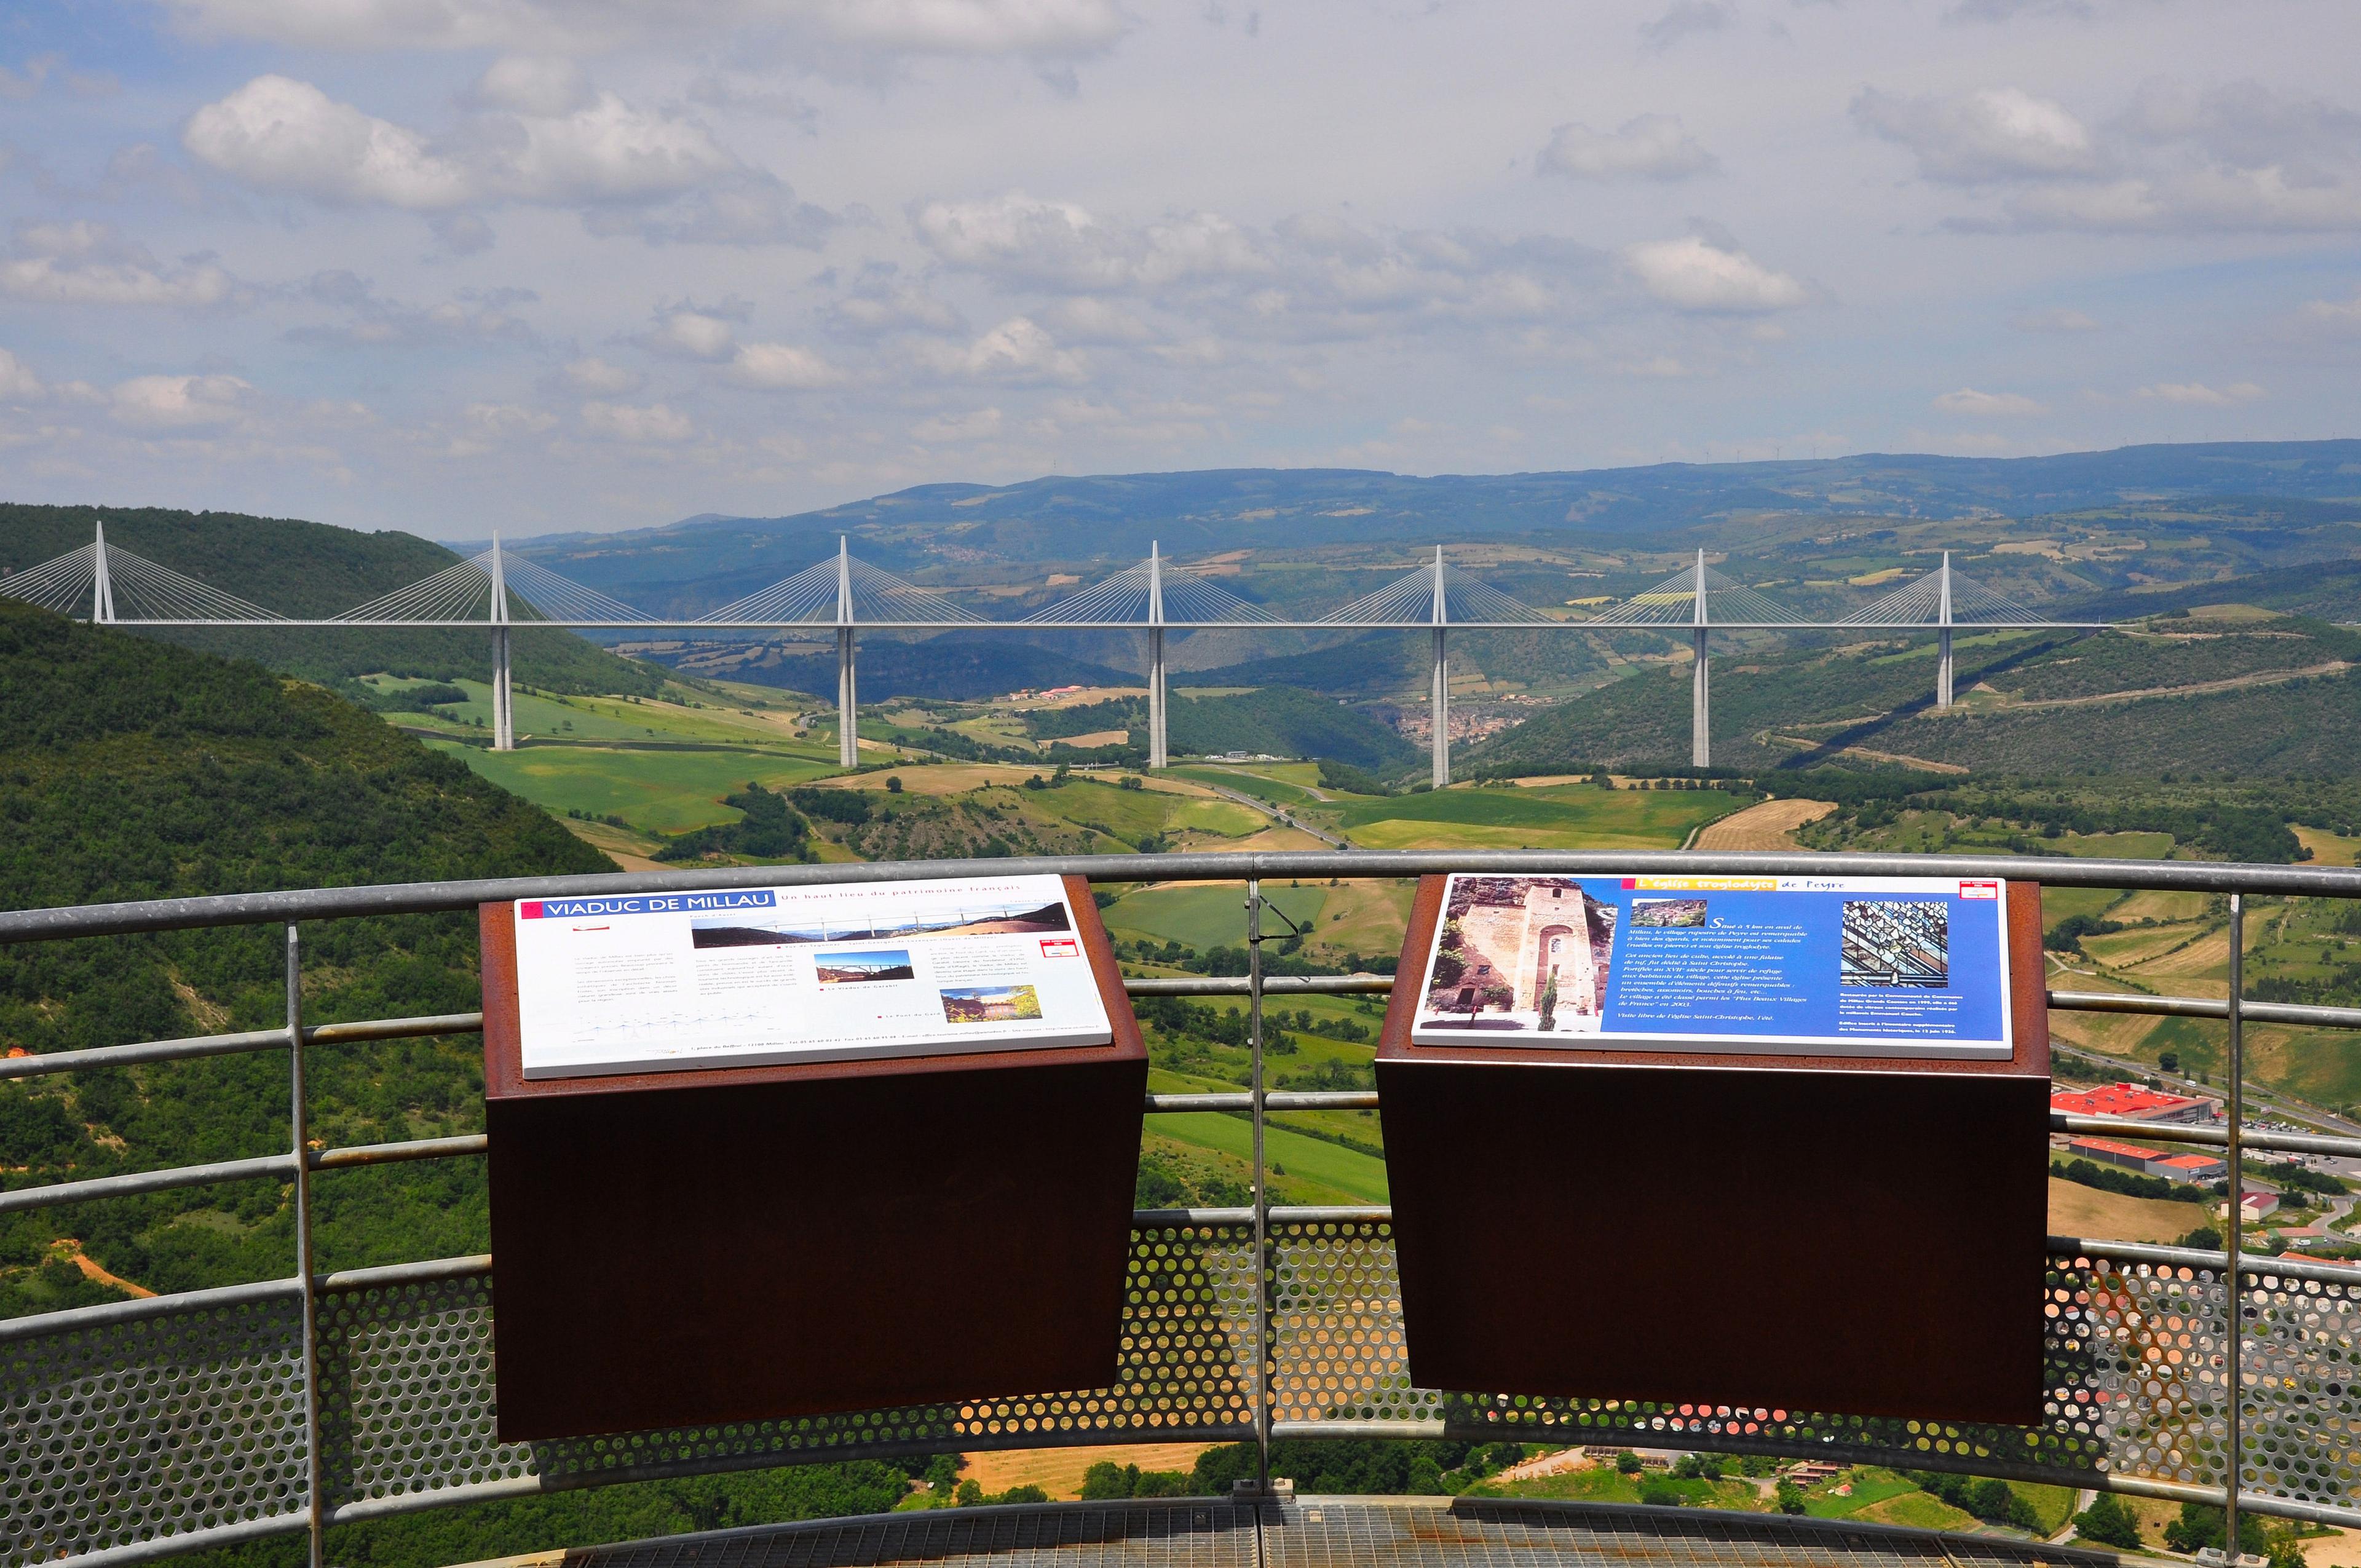 By camper over the highest viaduct in the world - the Millau Viaduct – image 3